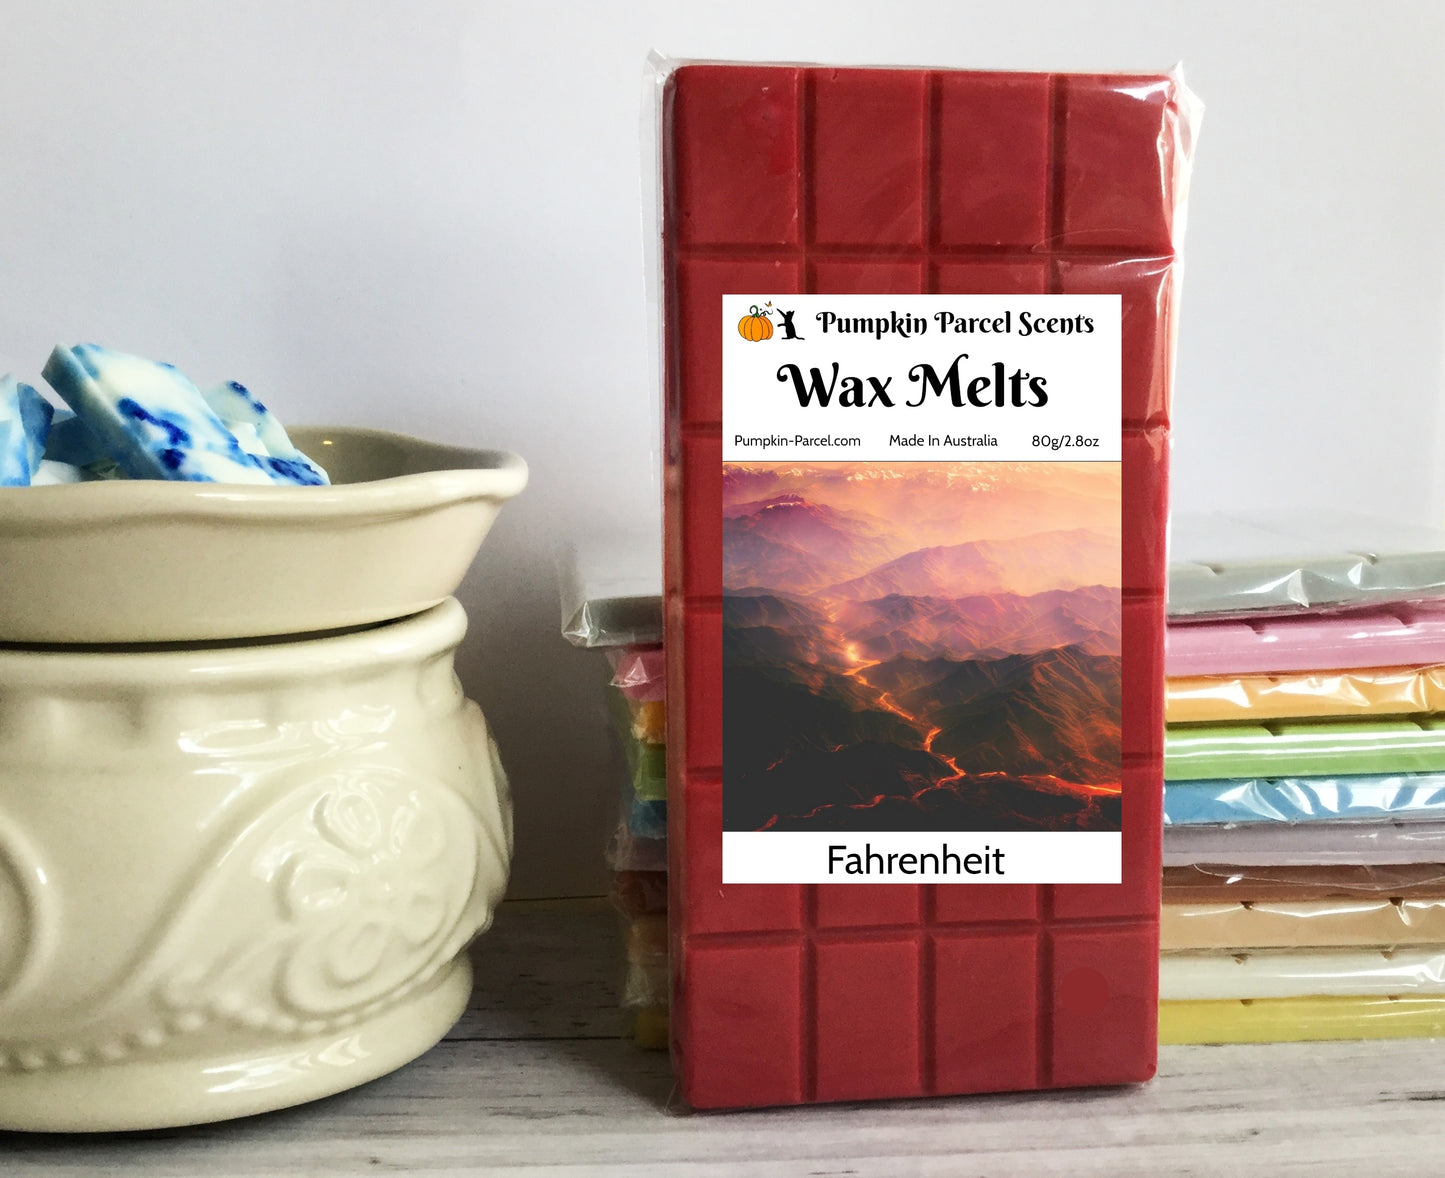 Fahrenheit Wax Melts - Inspired by the cologne